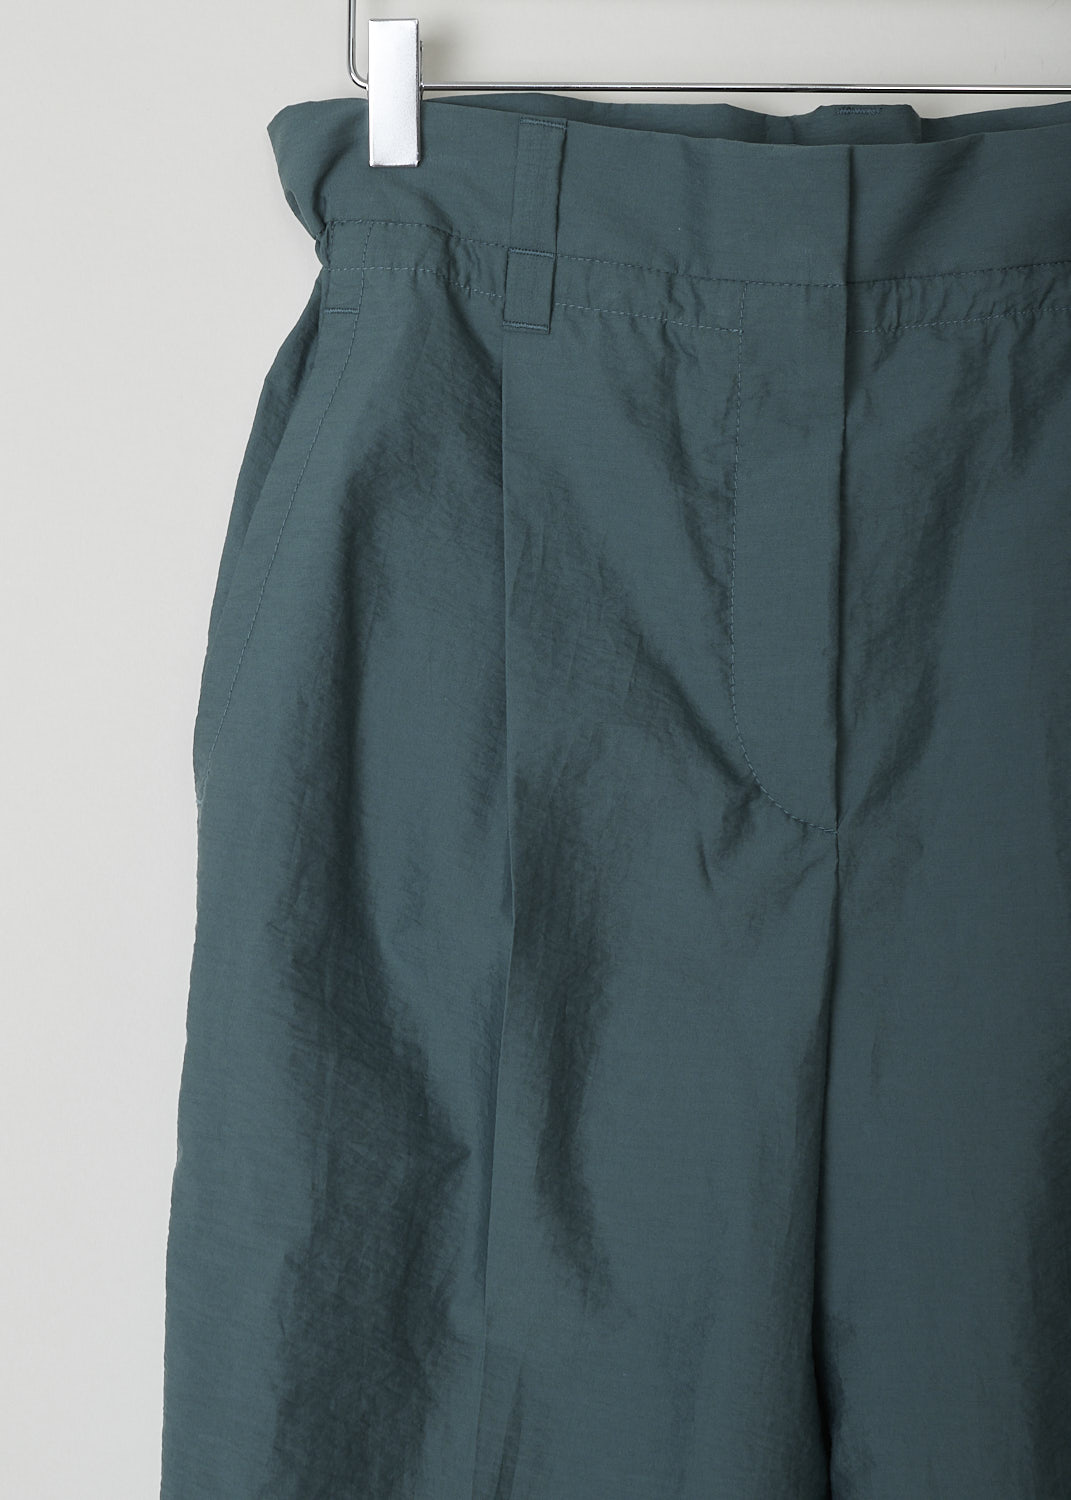 BRUNELLO CUCINELLI, TEAL GREEN PAPER BAG PANTS, M0F79P7102_C7287, Green, Blue, Detail, These teal green pants have a paper bag waist with belt loops.  The waistline is partly elasticated. The concealed press studs and zip function as the closure option. These pants have slanted pockets in the front and welt pockets in the back. The tapered pant legs have a centre crease. 
